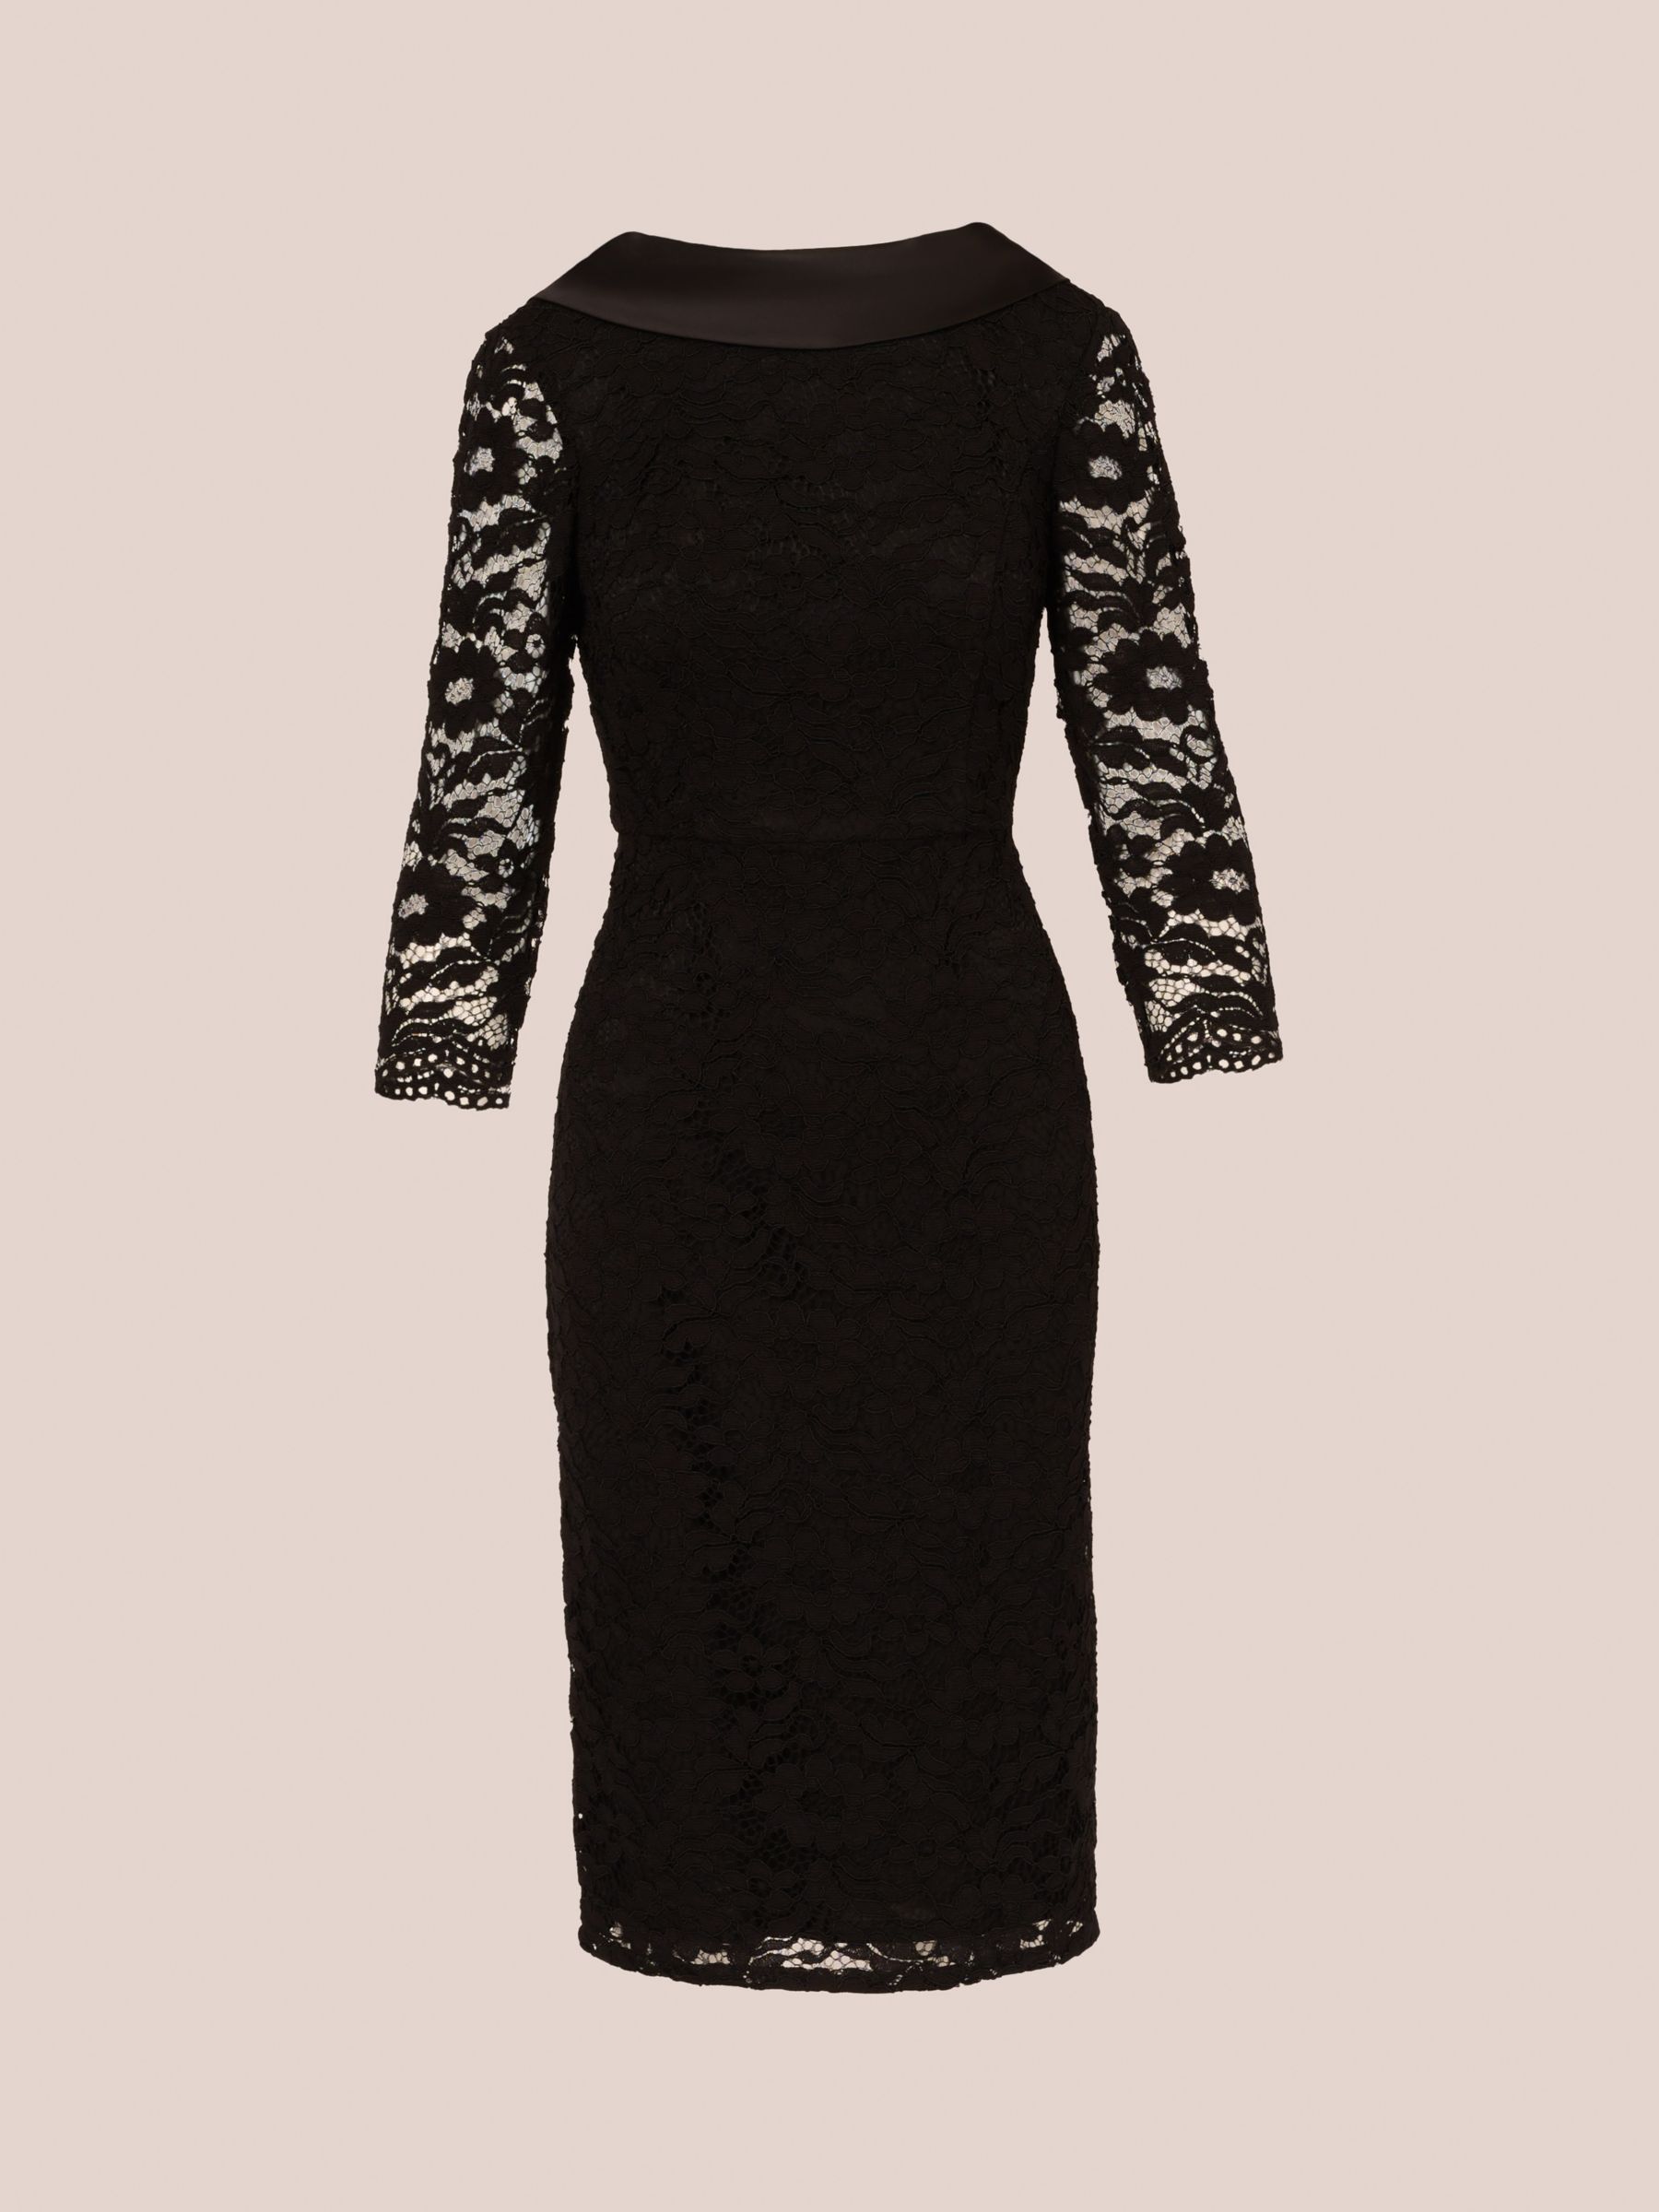 Adrianna Papell Roll Neck Lace Sleeve Sheath Dress, Black at John Lewis ...